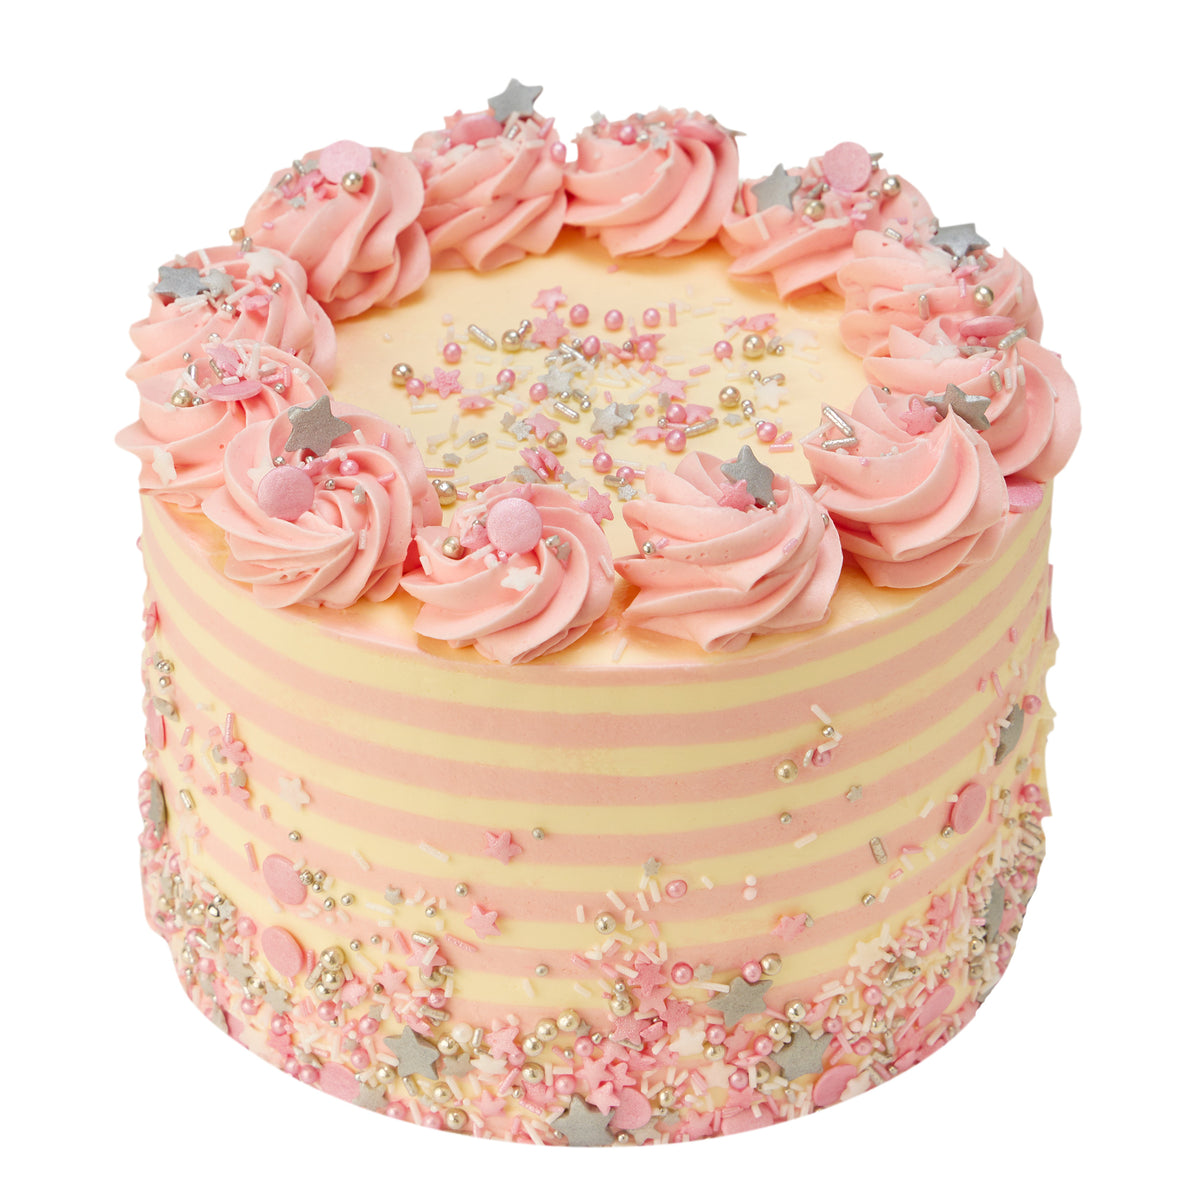 ROSE Powder PINK CAKE DECOR COLOR WITH FLAVOURS, For Bekary